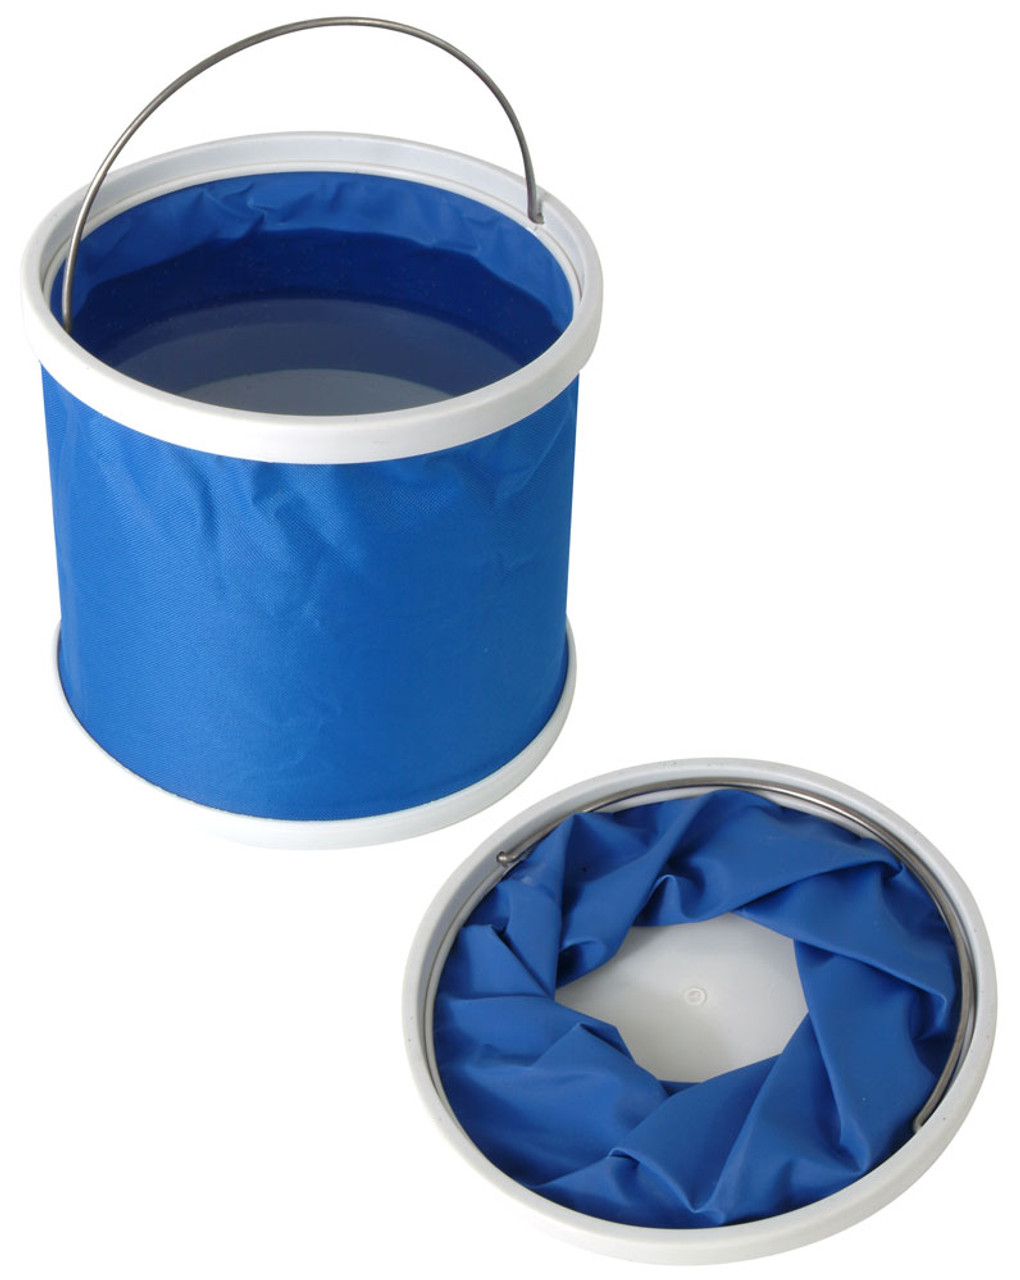 Folding Collapsible Bucket For Sale